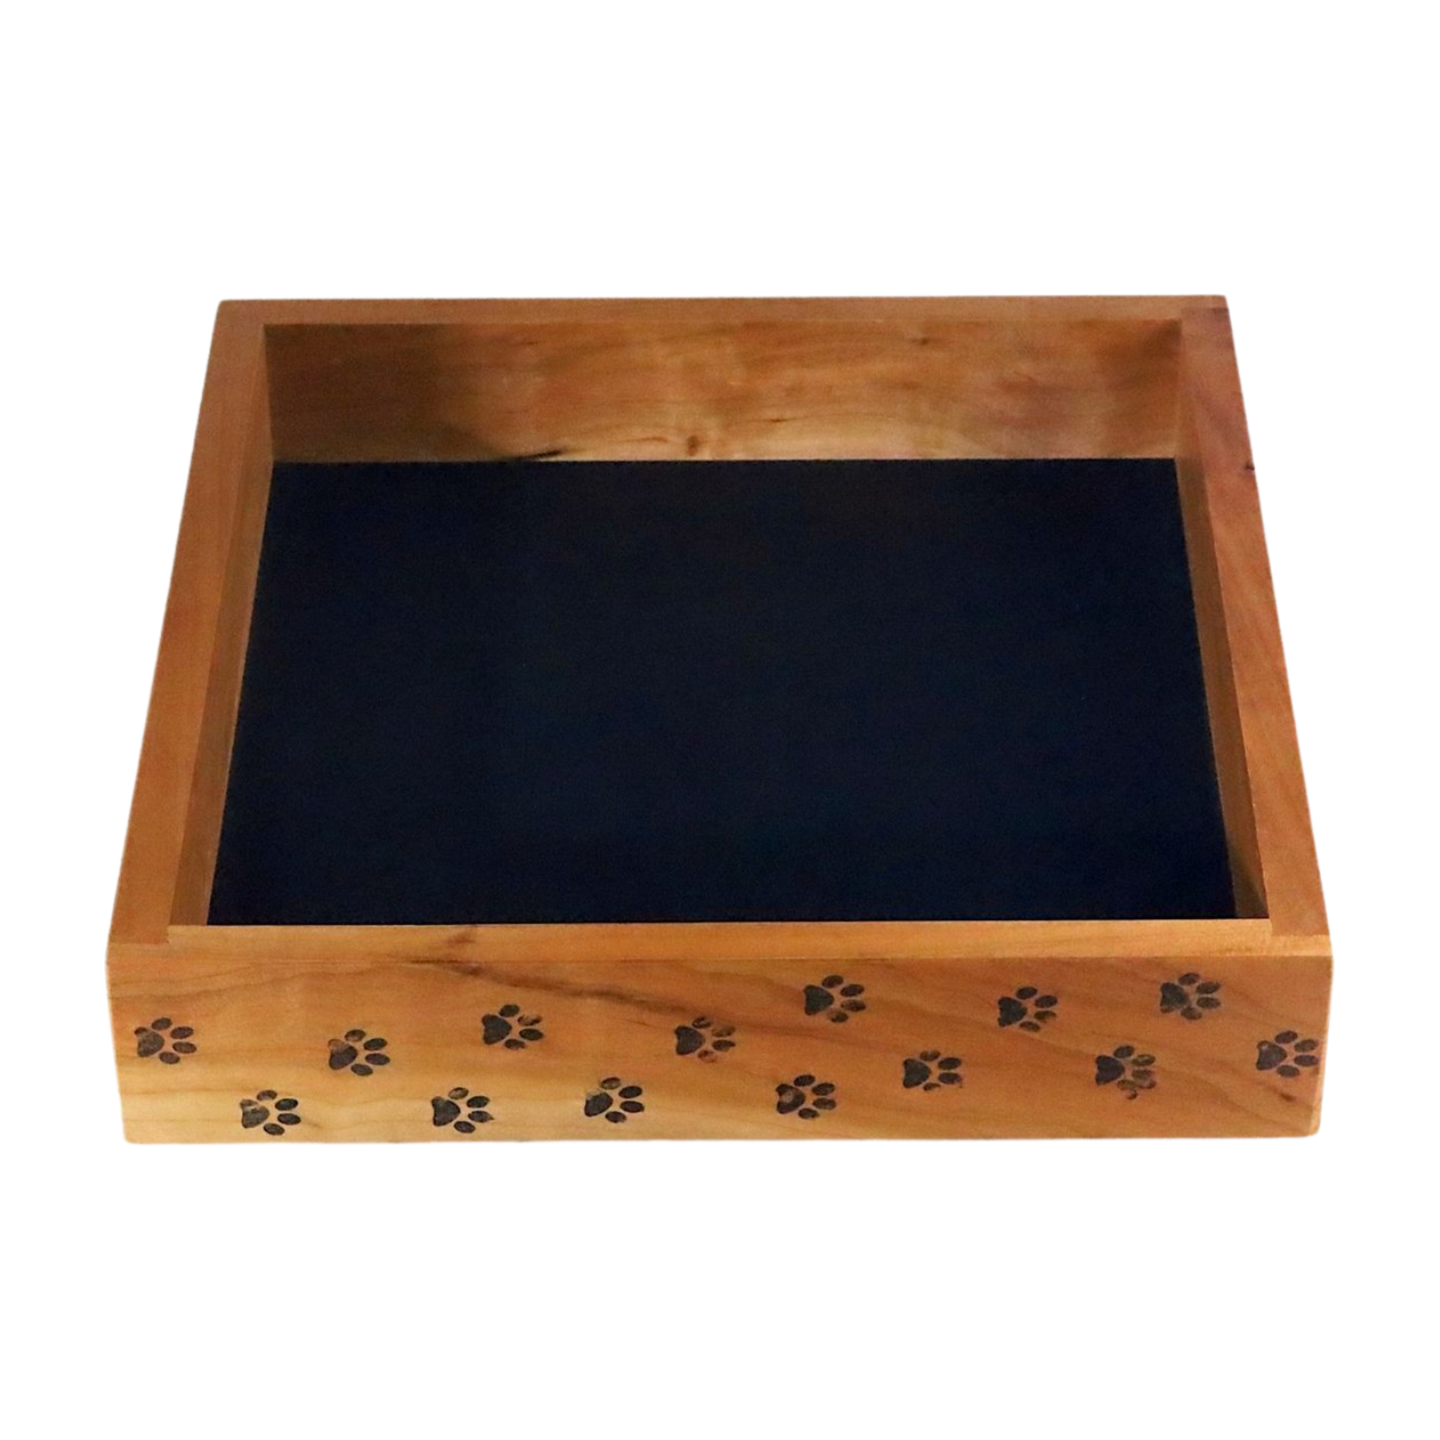 large cute cat paw wood dice tray for TTRPG, Bunco, Yahtzee Dice Games, DnD dice rolling tray with kitty paw prints goth gift for gamer girl - Dragon Armor Games